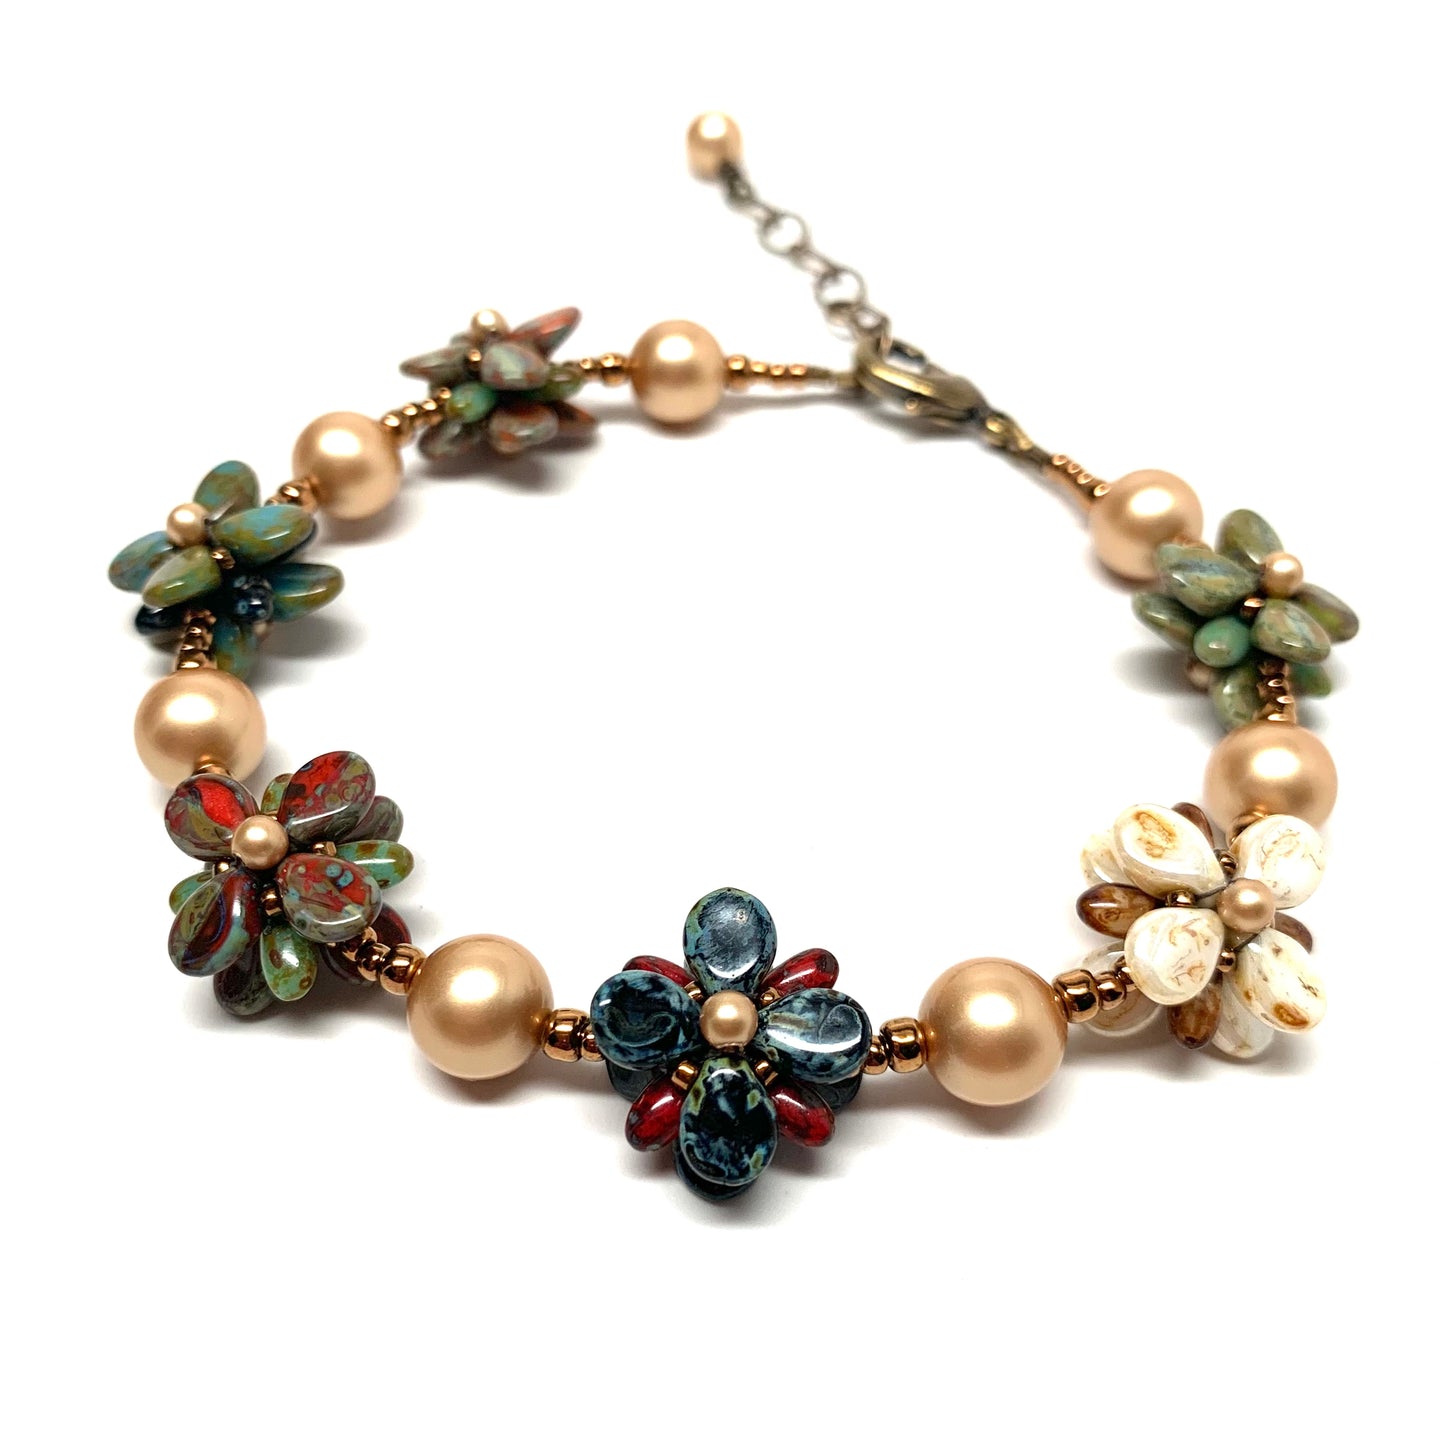 Flores Bracelet - Picasso Mix Flowers with Gold Pearls